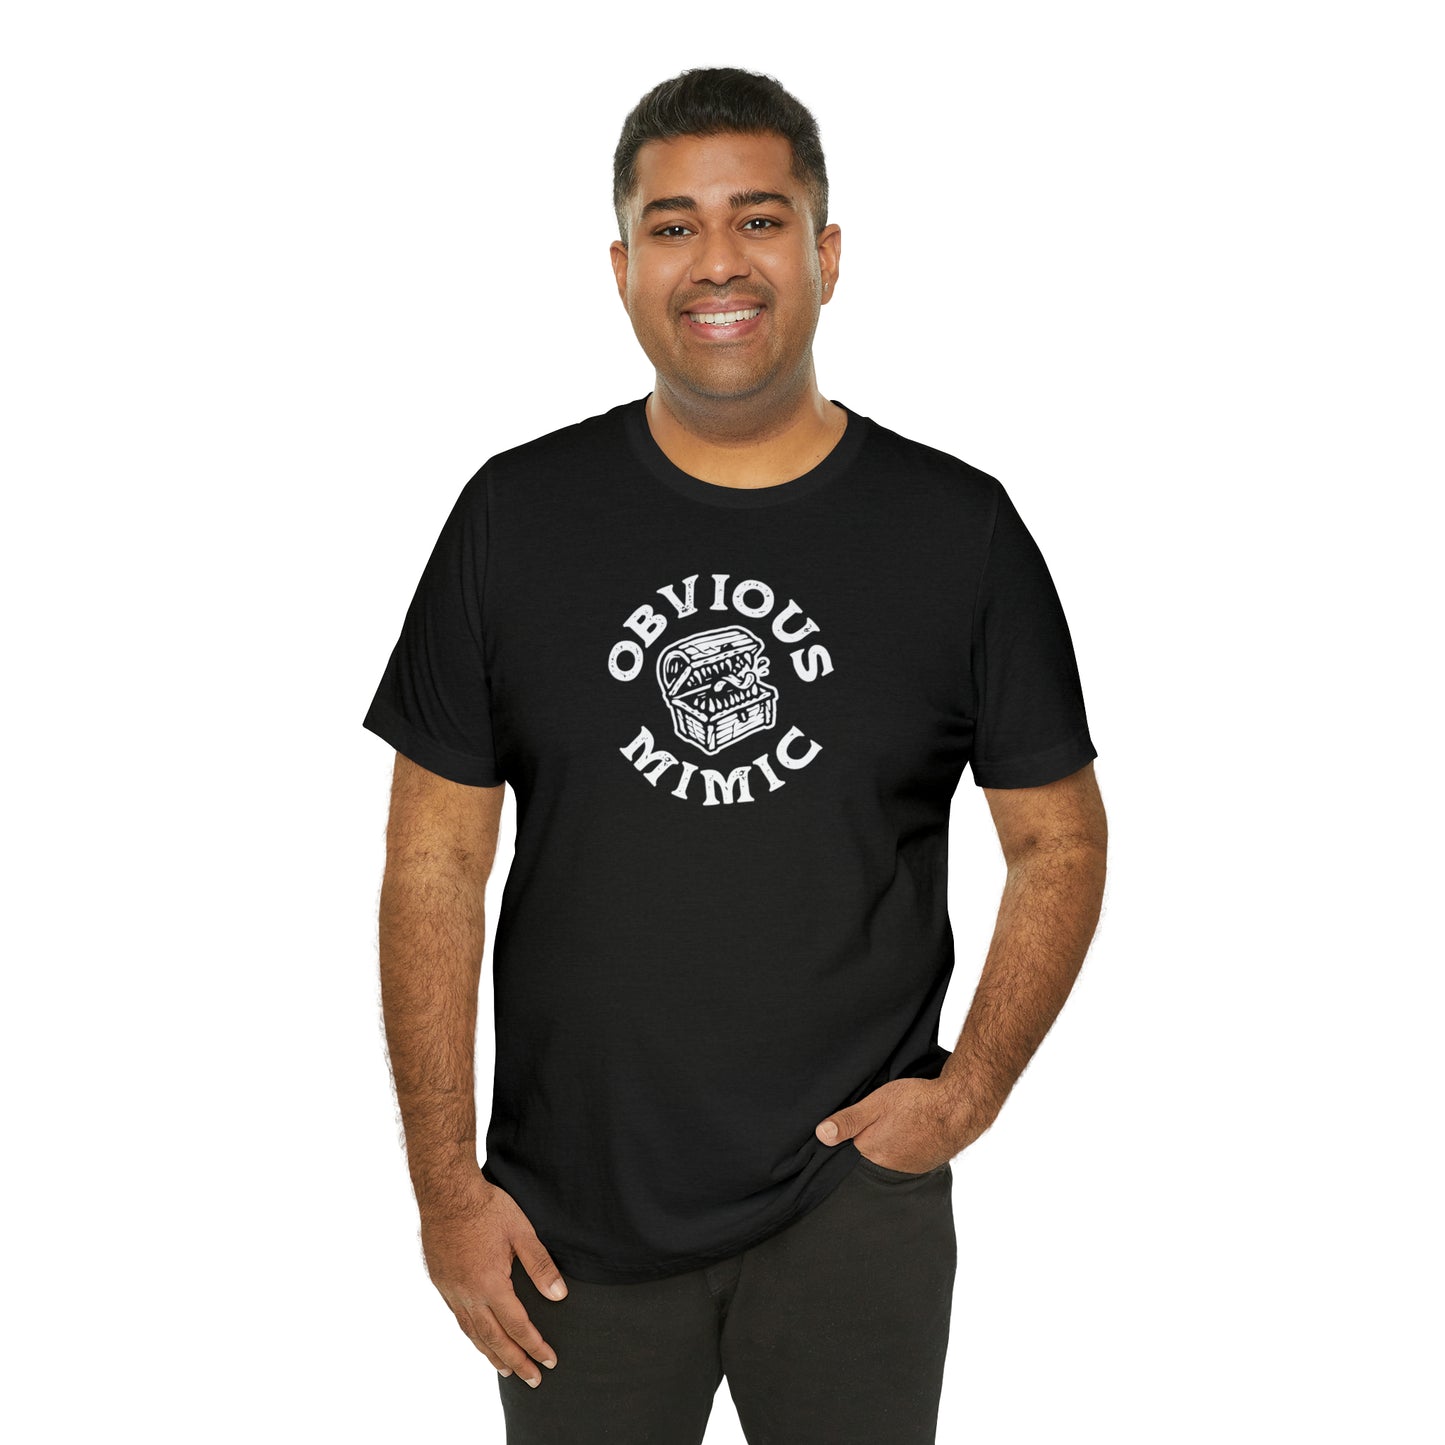 Classic Mimic Retail Fit Fantasy Geek T-shirt | Obvious Mimic Official Collection